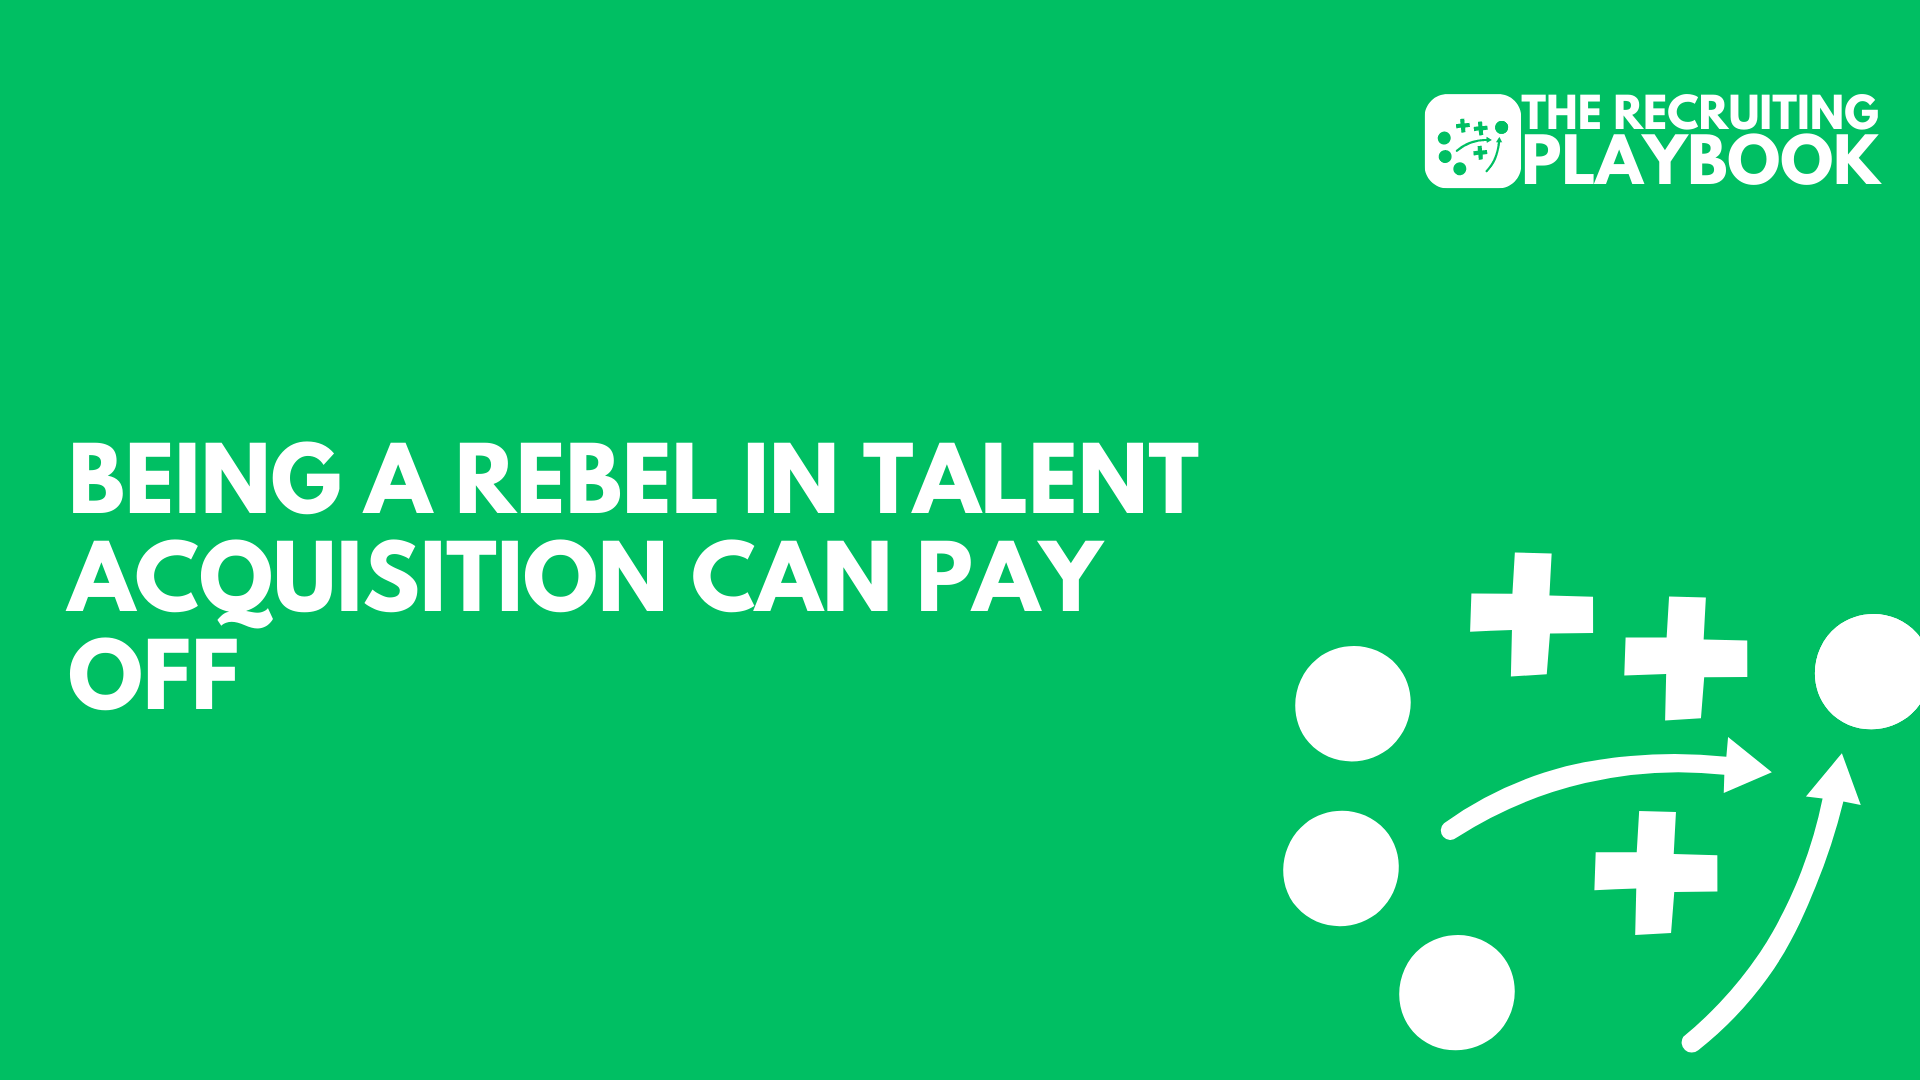 Being A Rebel in Talent Acquisition Can Pay Off